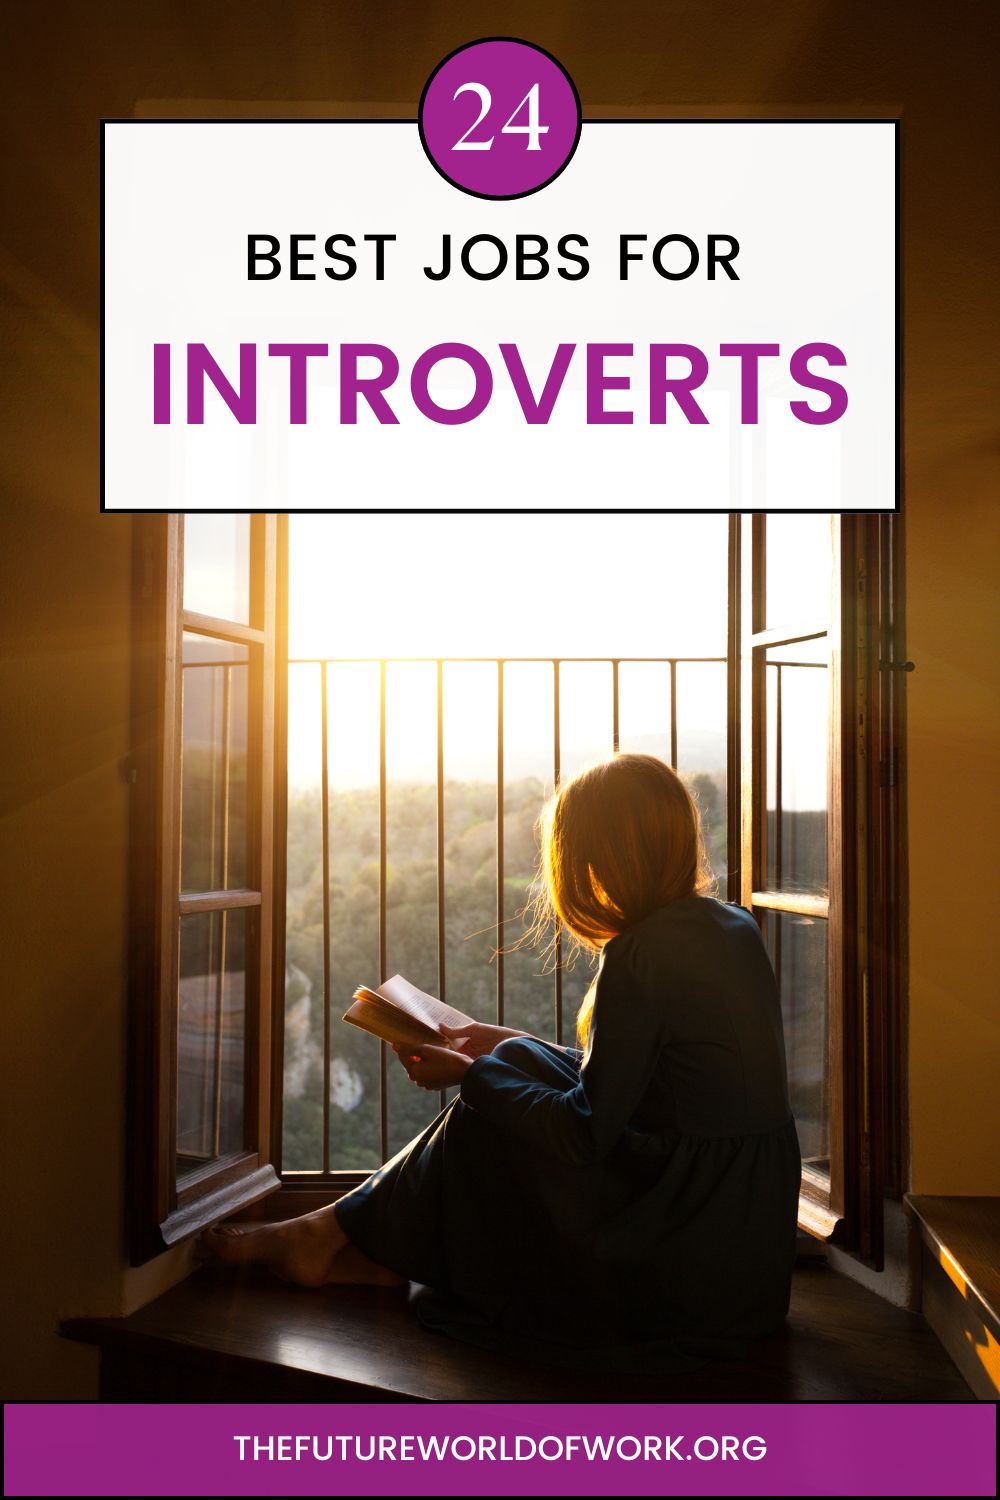 Job for introvers